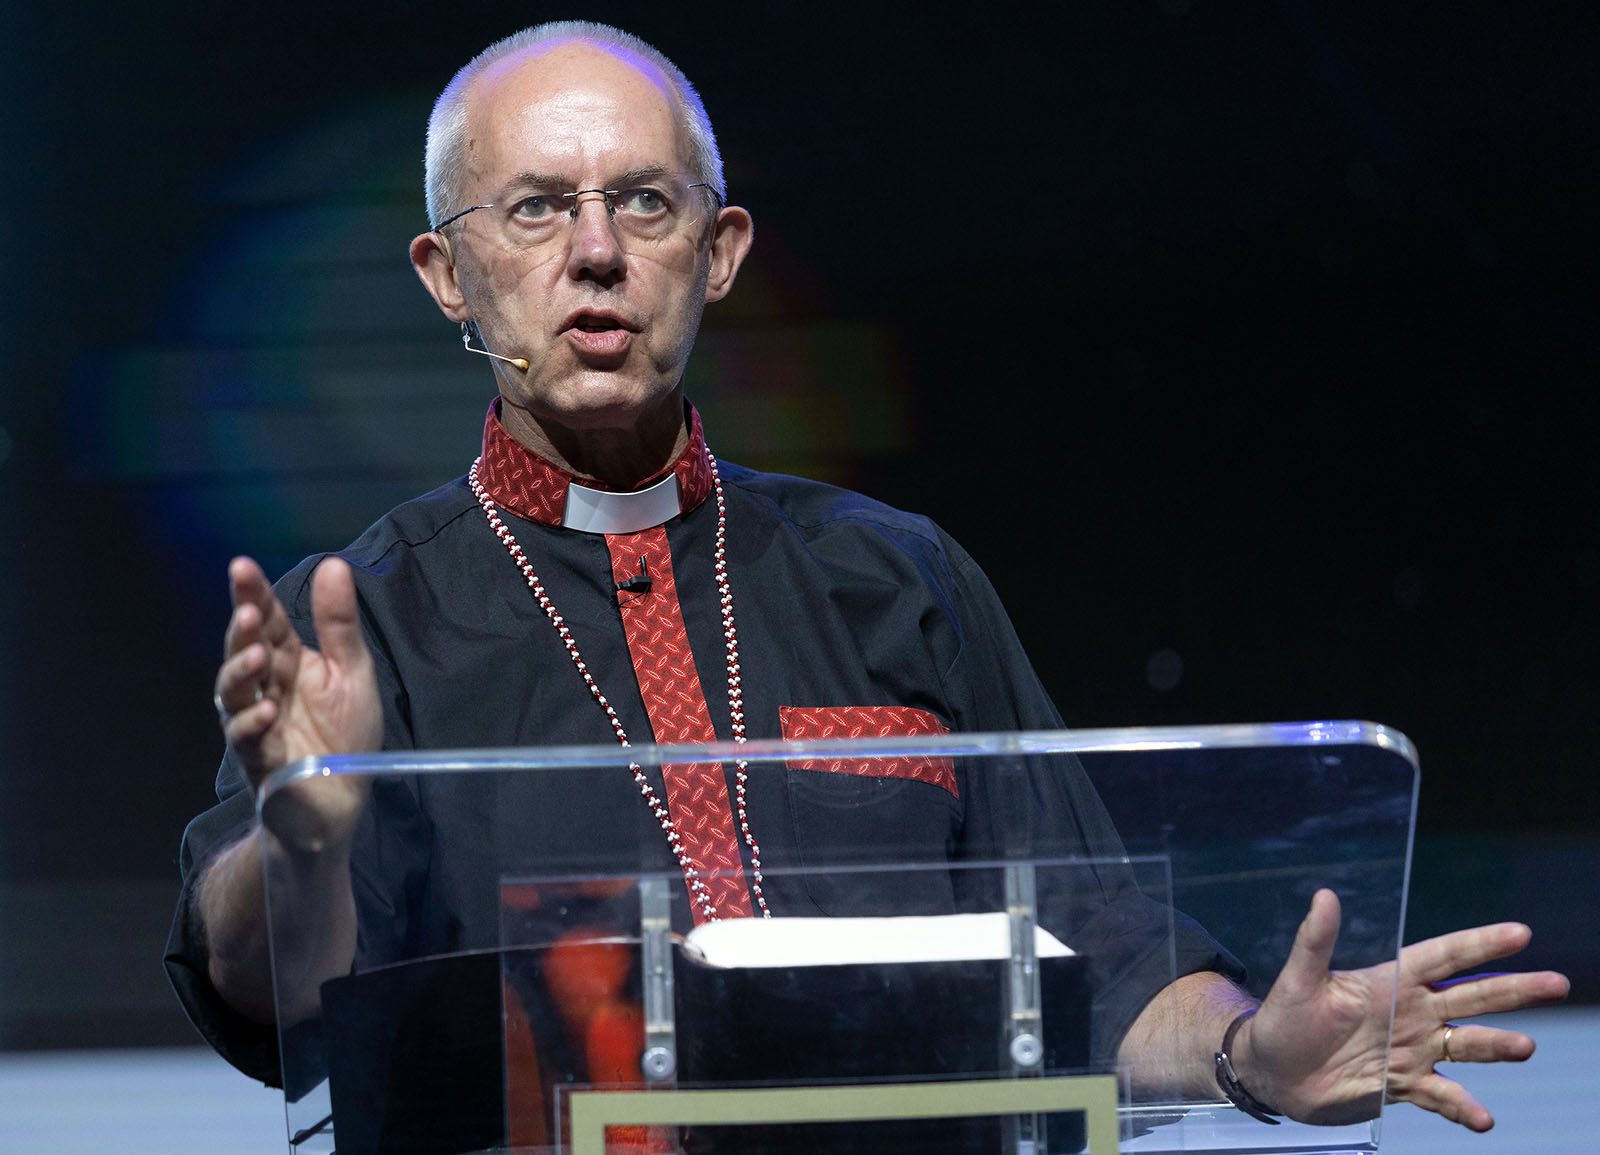 Justin Welby, Archbishop of Canterbury, delivers his first keynote address at the Lambeth Conference 2022, held at the University of Kent in Canterbury, England on Friday July 29, 2022. Photo by Neil Turner for Lambeth Conference